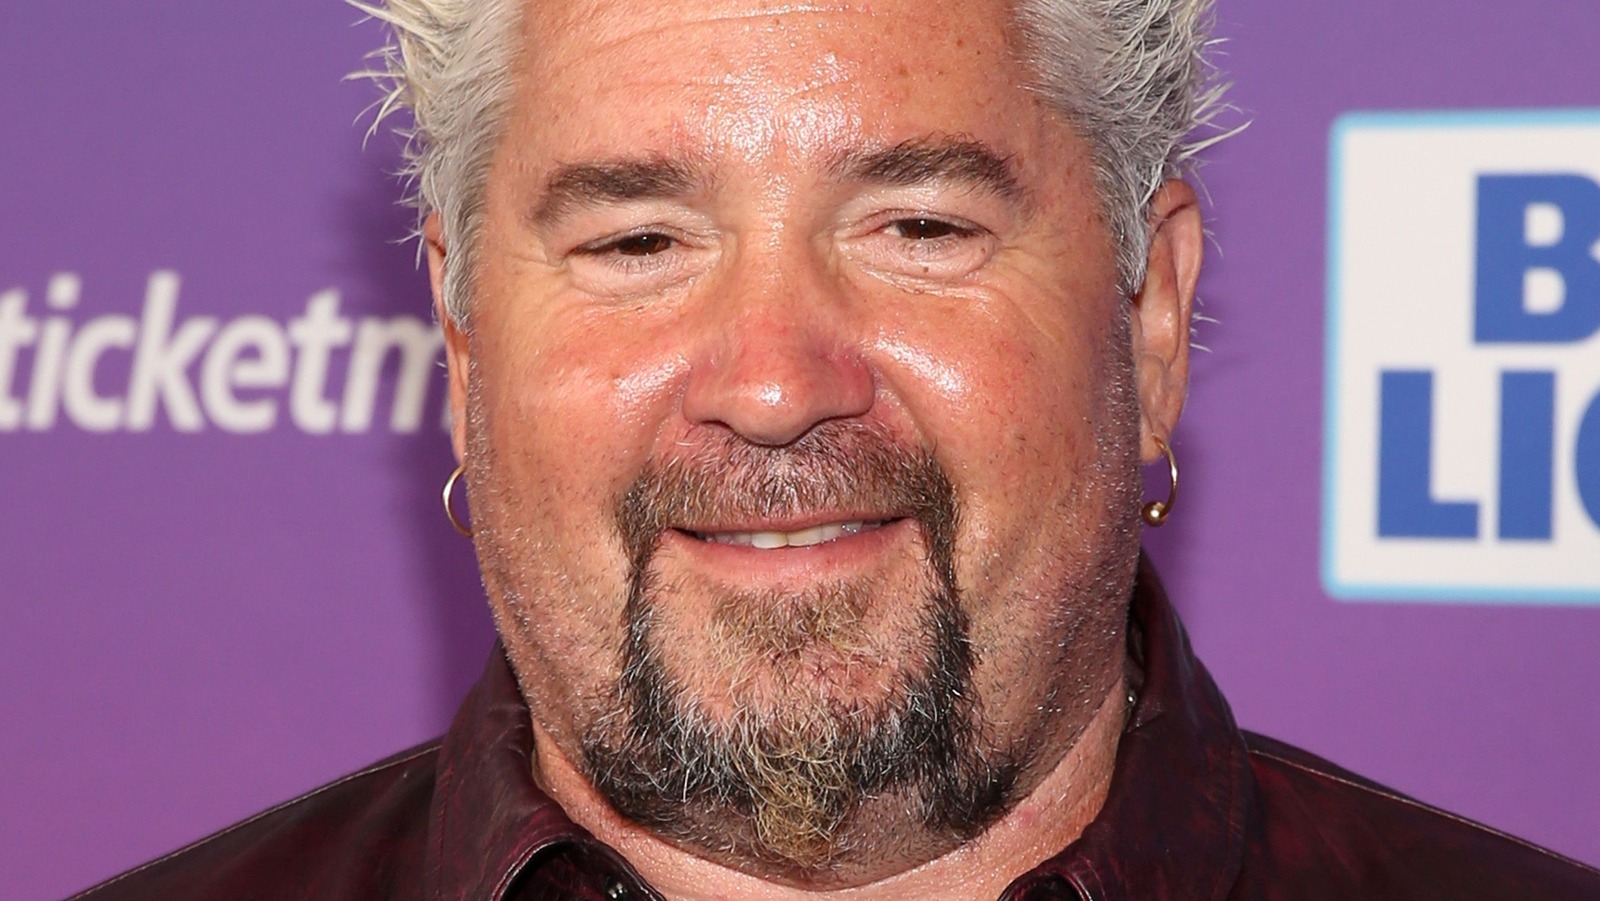 Guy Fieri's Super Bowl Food Tips Will Upgrade Your Game Day Spread